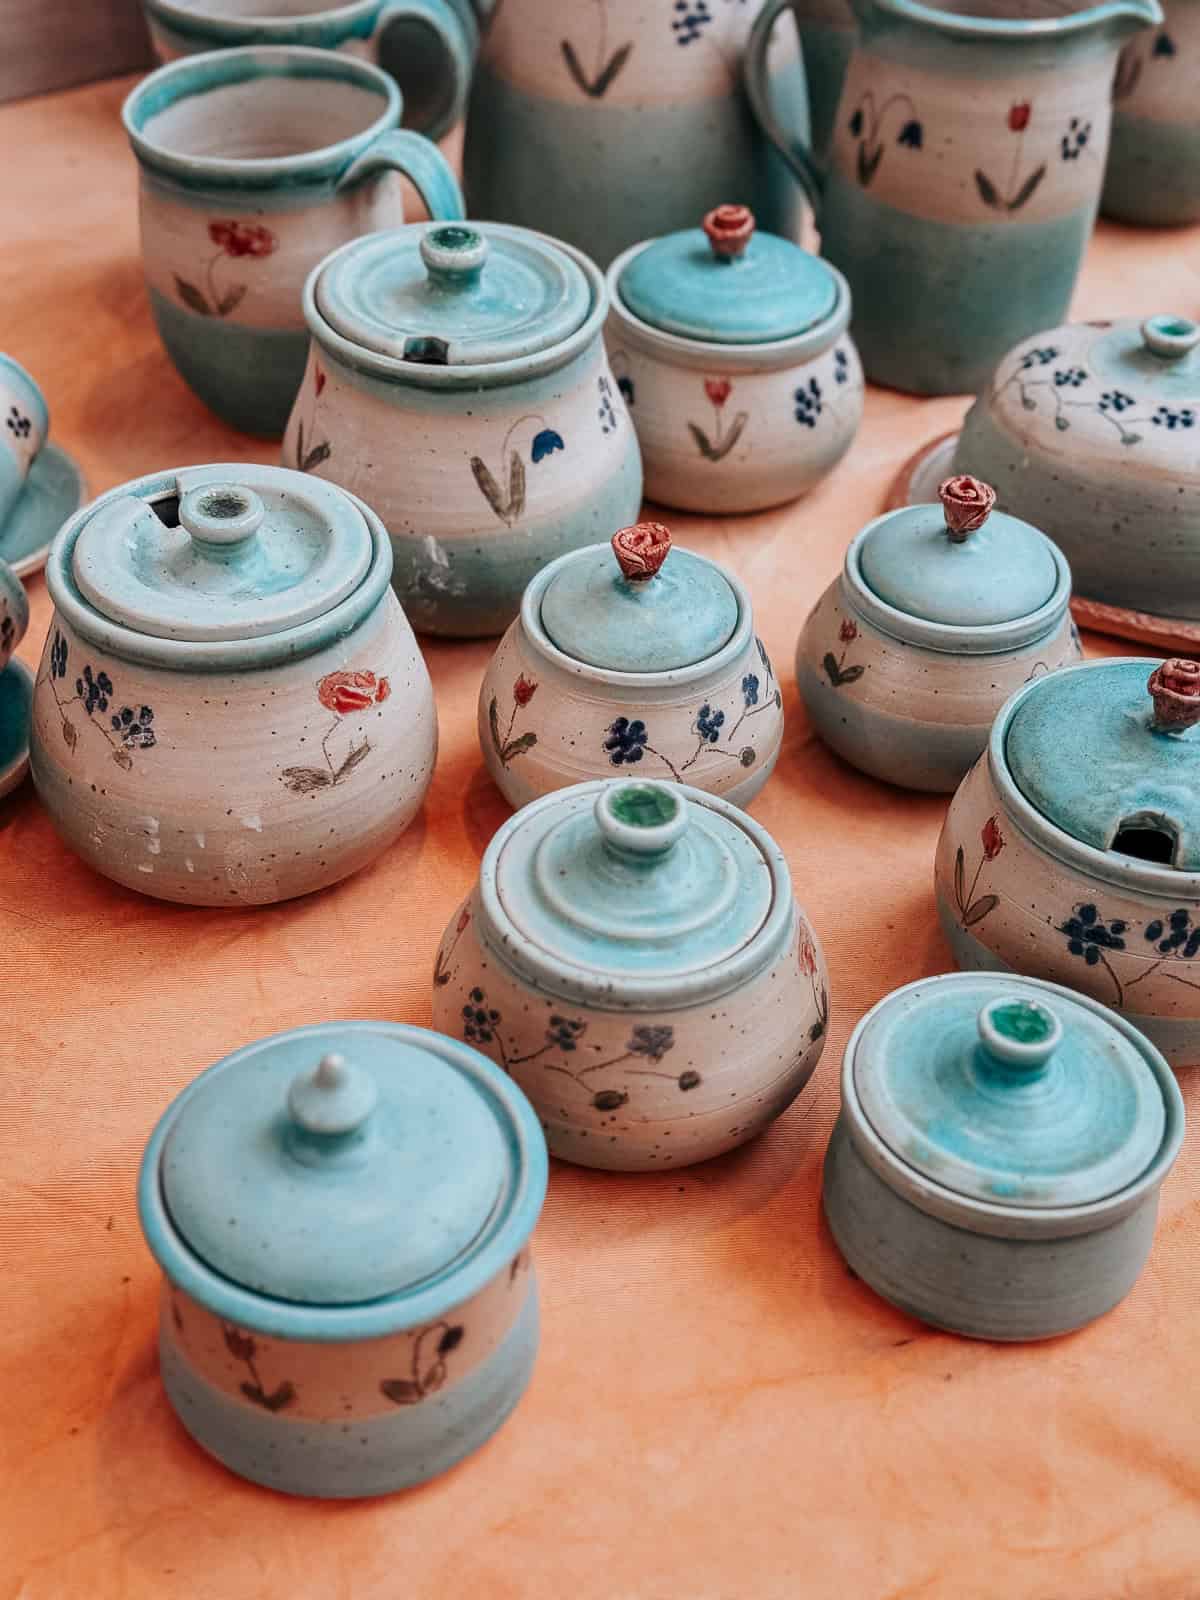 Variety of handcrafted ceramic pots displayed on a table, featuring light blue and sandy glazes with delicate floral designs